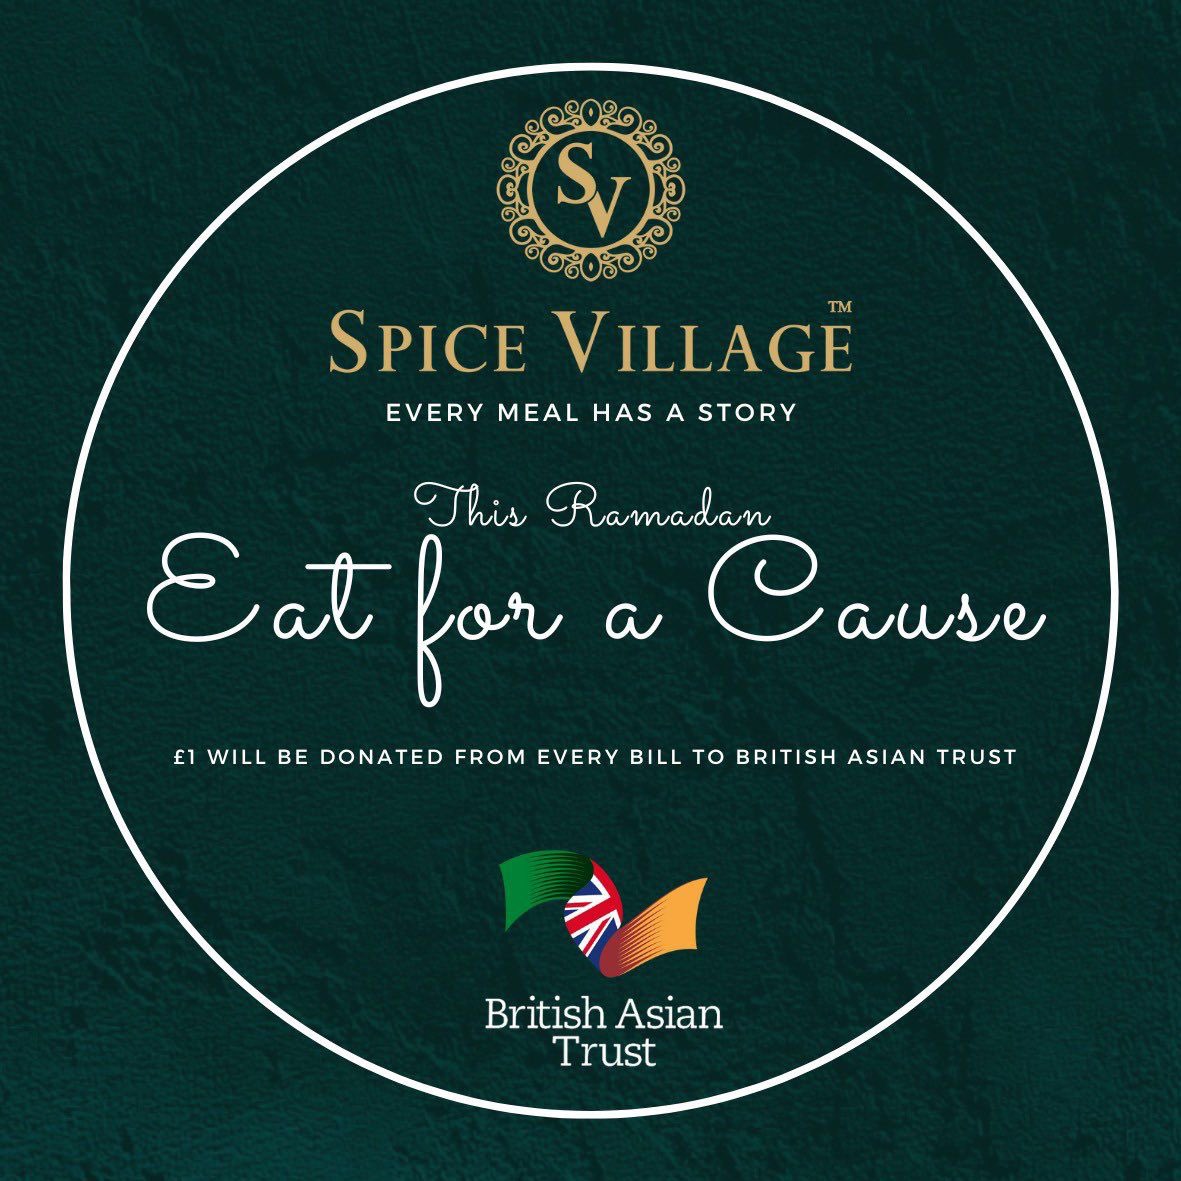 This Ramadan, join @spice_village group to support @britishasiantst initiative to tackle mental health crisis in Pakistan 🇵🇰 . With every meal, #spicevillage will be donating £1 towards BAT to make a difference. Your support can help transform lives – #Eatforacause @r_hawkes